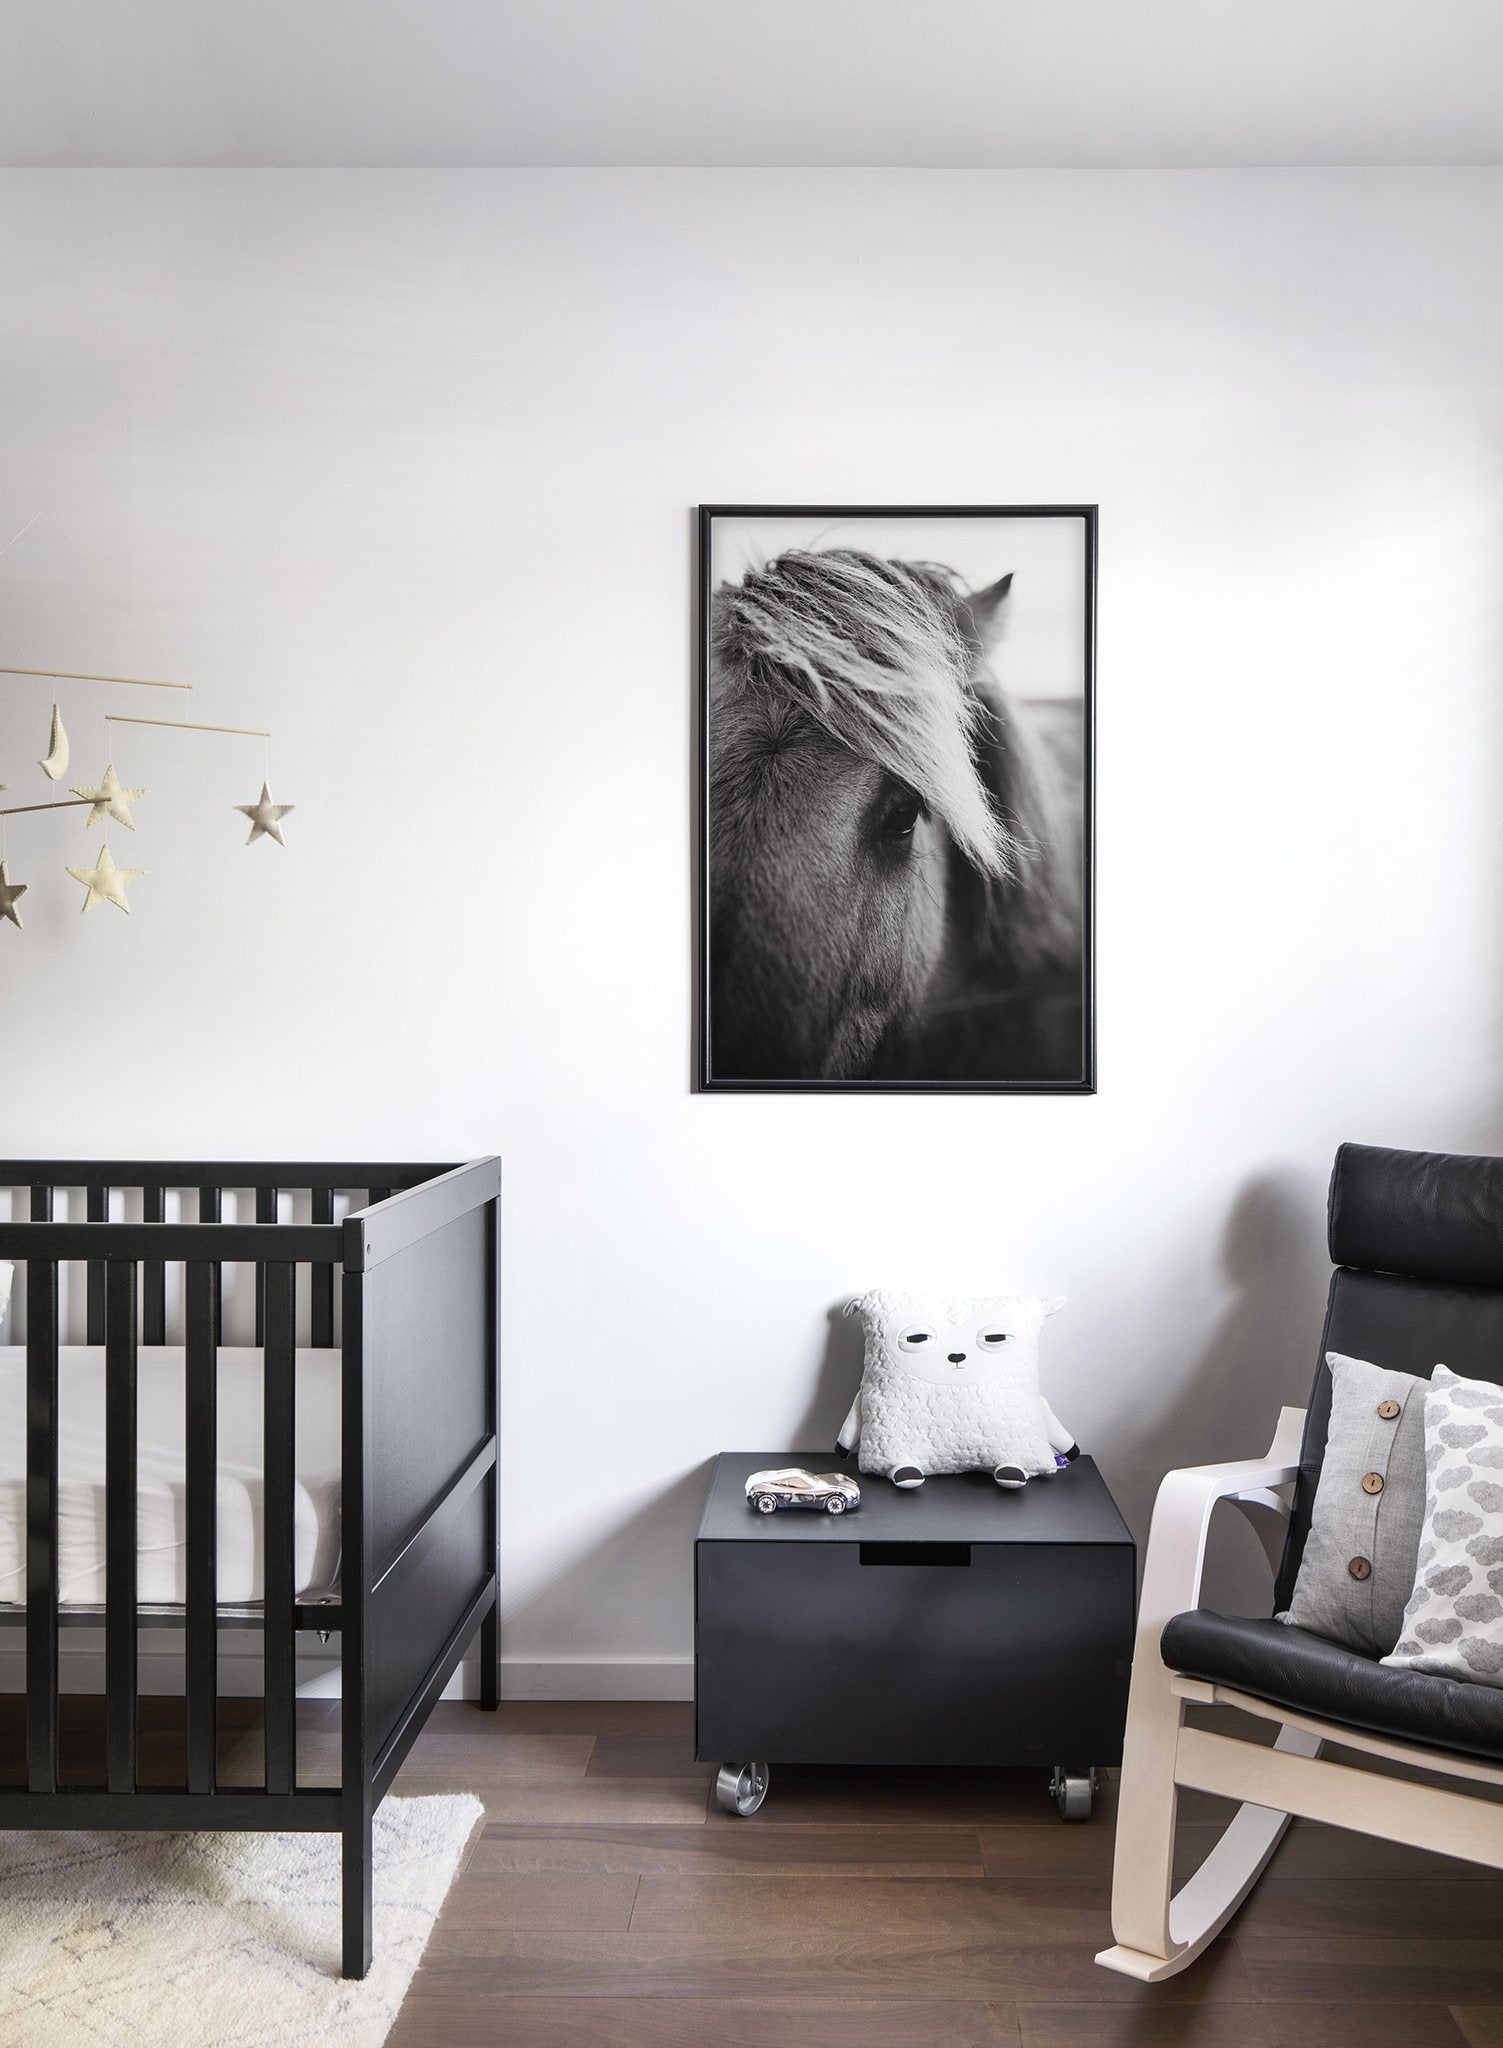 Modern minimalist poster by Opposite Wall with black and white photography of horse - Lifestyle - Kids Bedroom